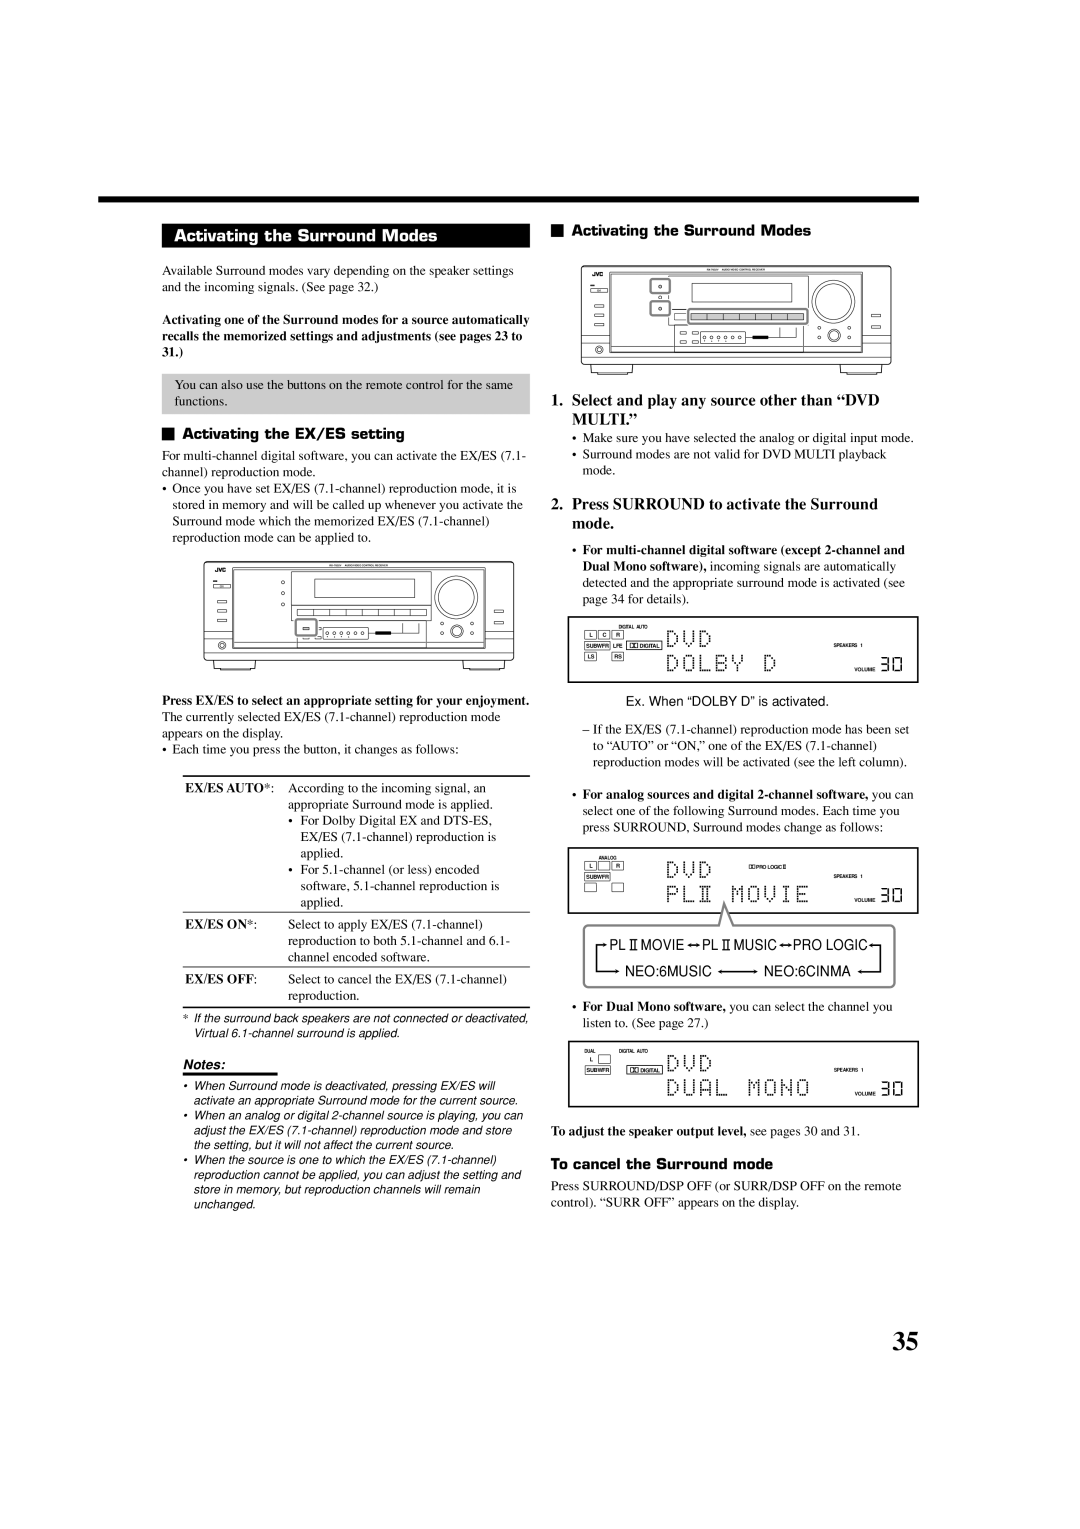 JVC LVT1007-010A[A] Activating the Surround Modes, Press SURROUND to activate the Surround mode, NEO 6MUSIC NEO 6CINMA 